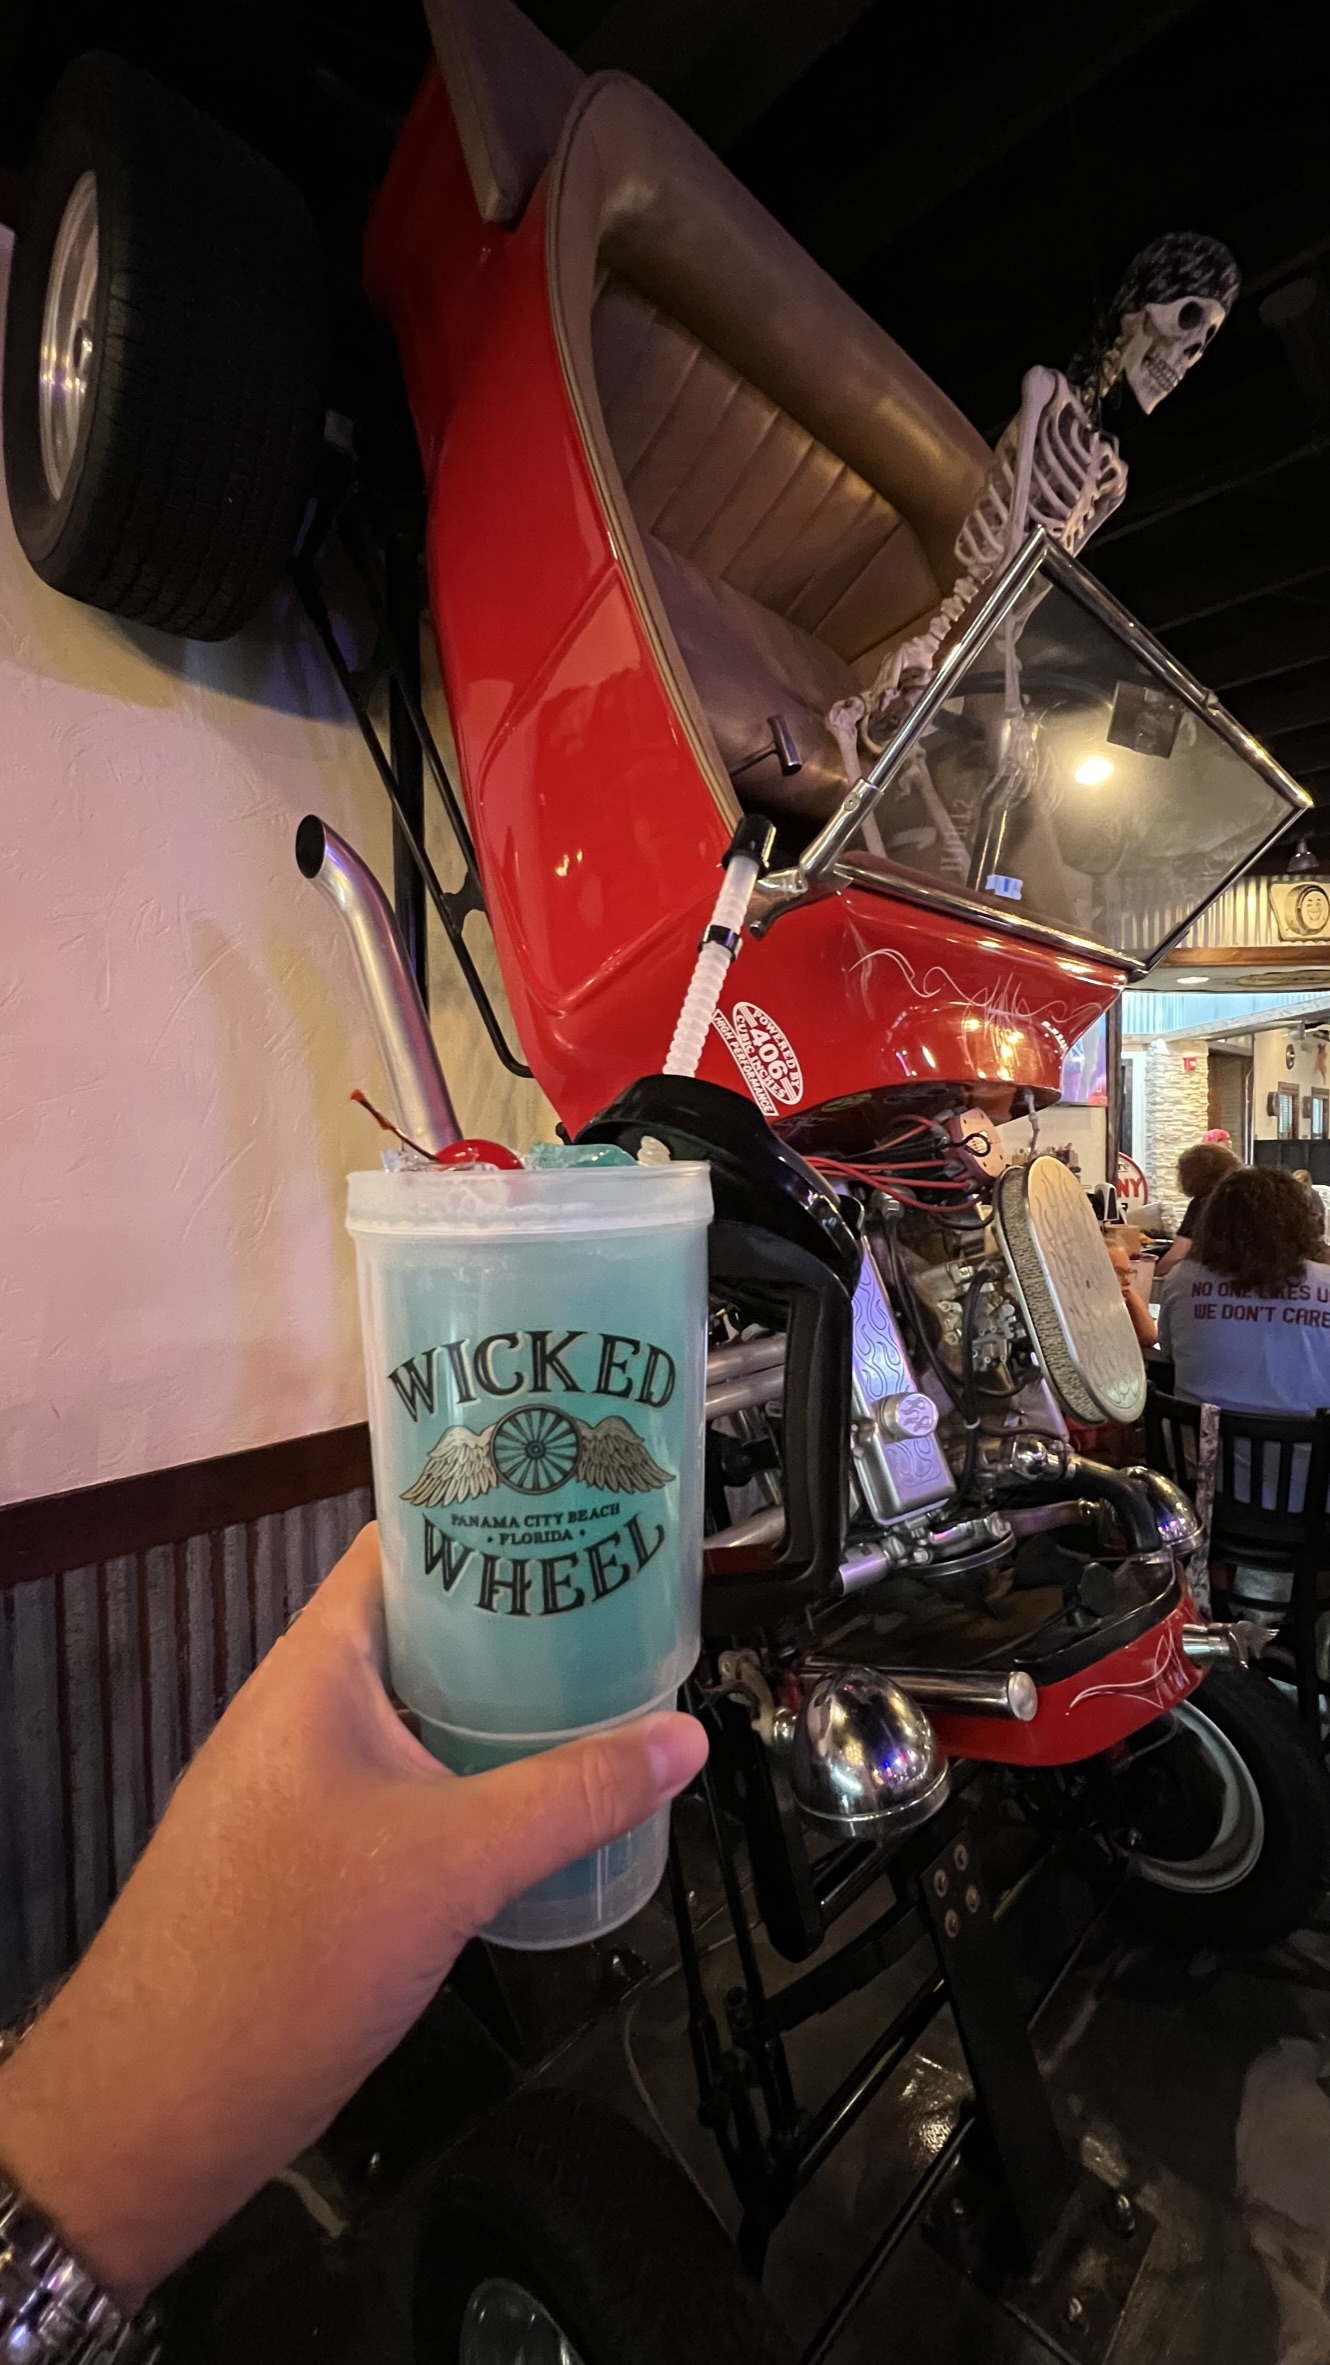 The Best Family-Friendly Activities in Panama City Beach Wicked wheel